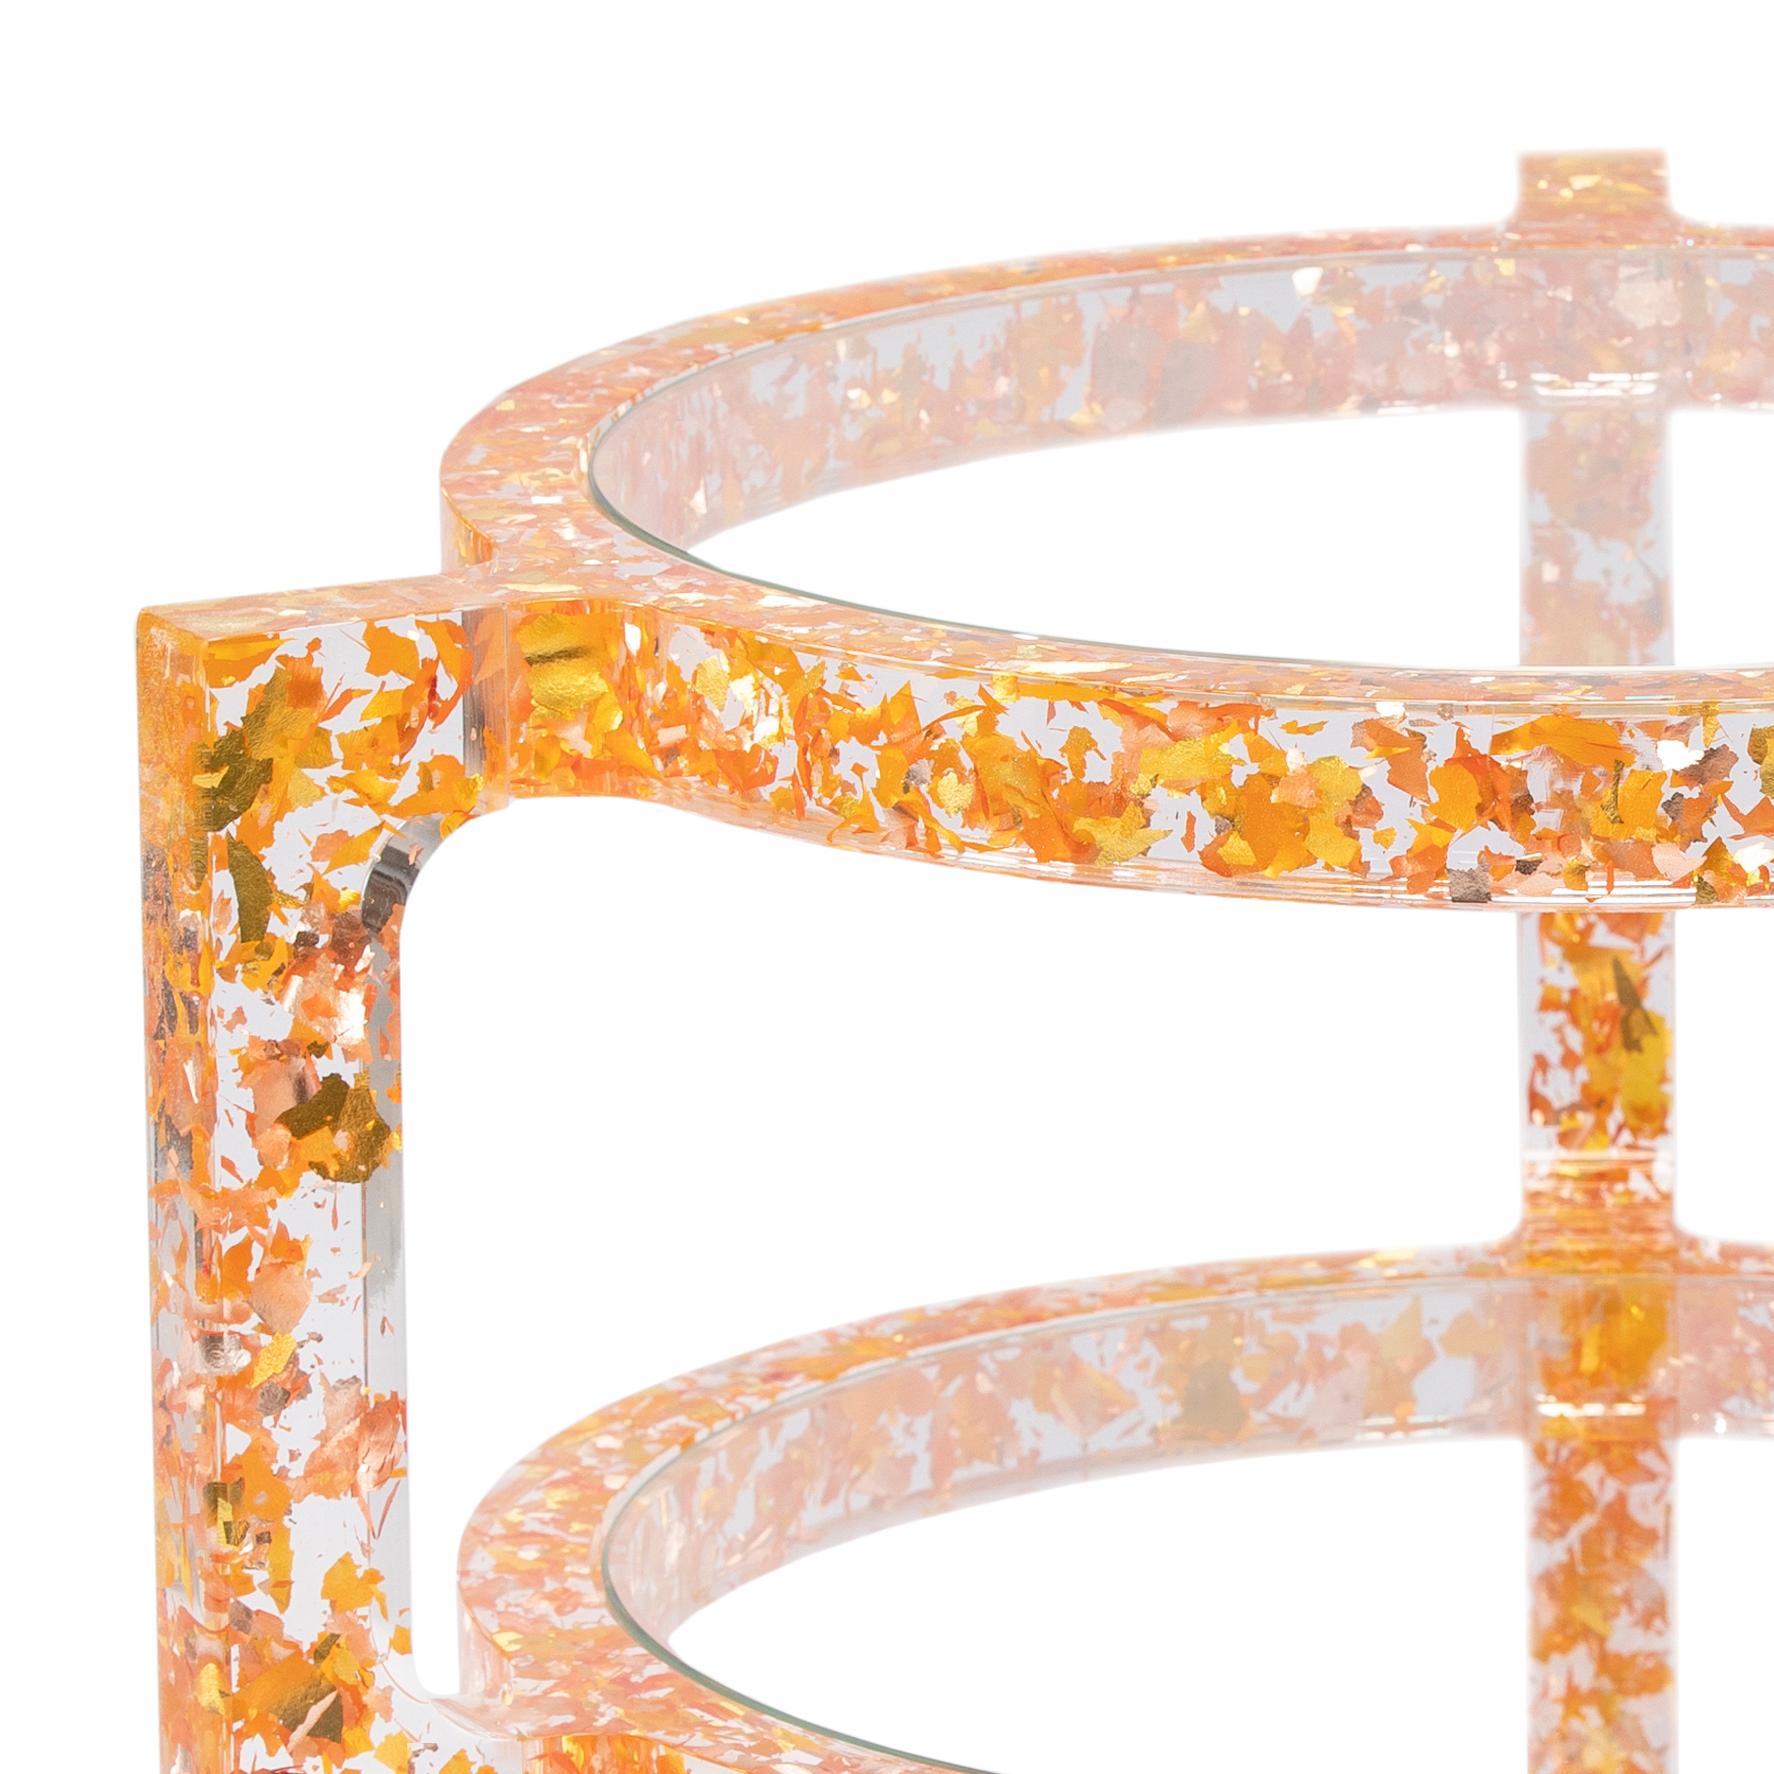 The MIDAS side table is comprised of carefully shredded colored silver-leaf, all left to randomly float in the table’s crystal clear acrylic frame. Light bounces and reflects off the leaf providing a confetti-like pattern and a unique fragmented